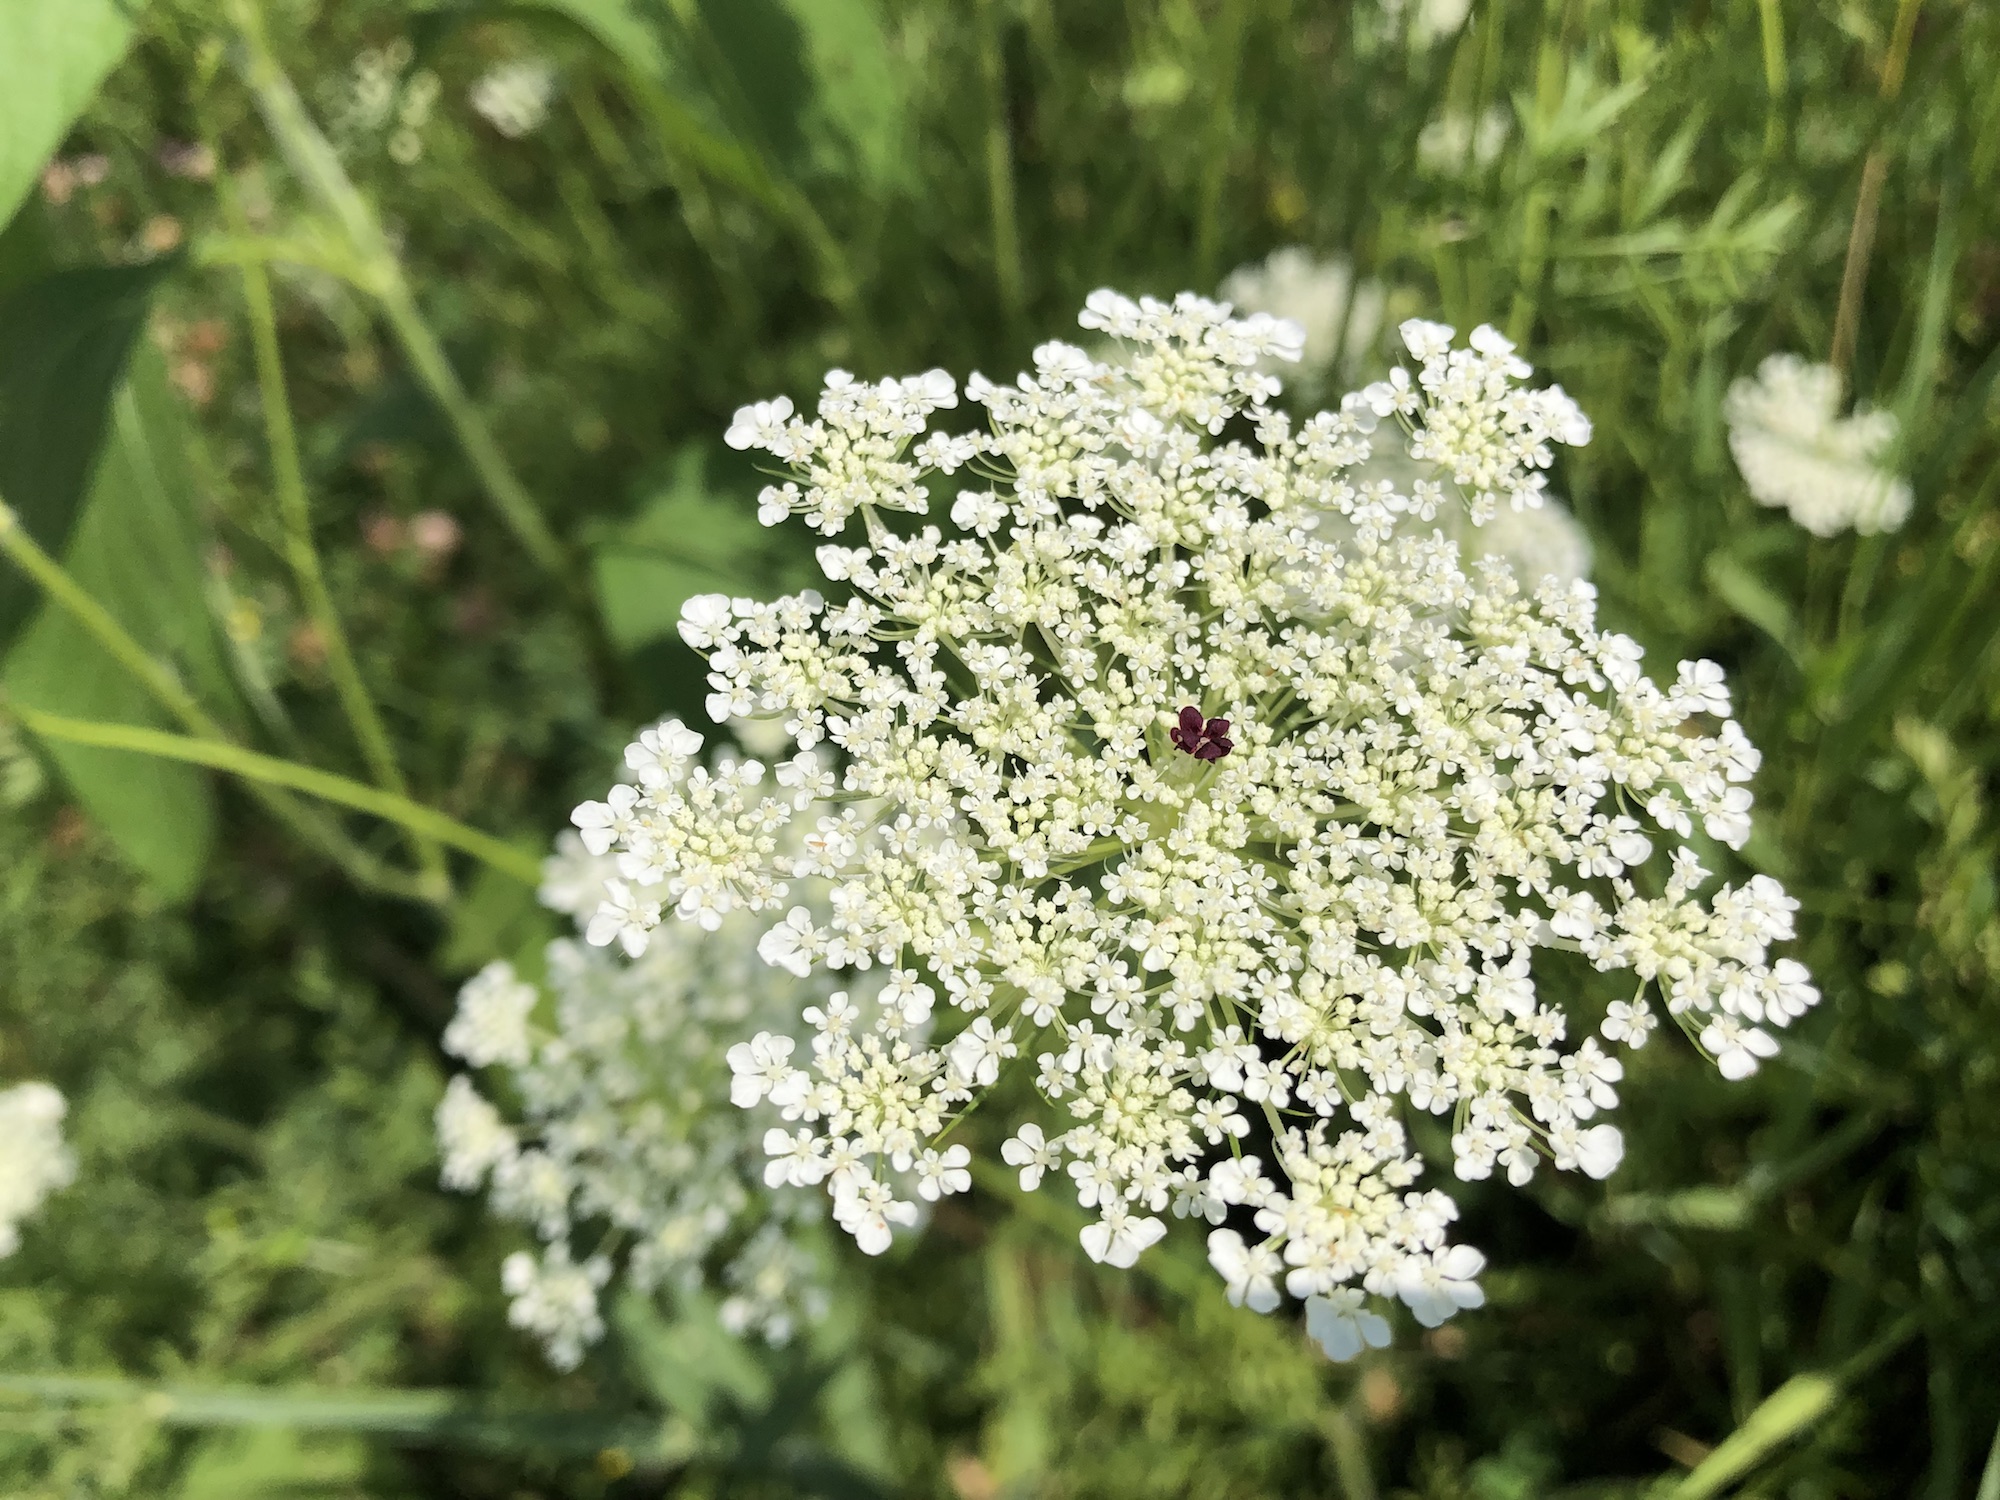 Queen Anne's Lace on bank of retaining pond on the corner of Nakoma Road and Manitou Way in Madison, WI on July 27, 2019.